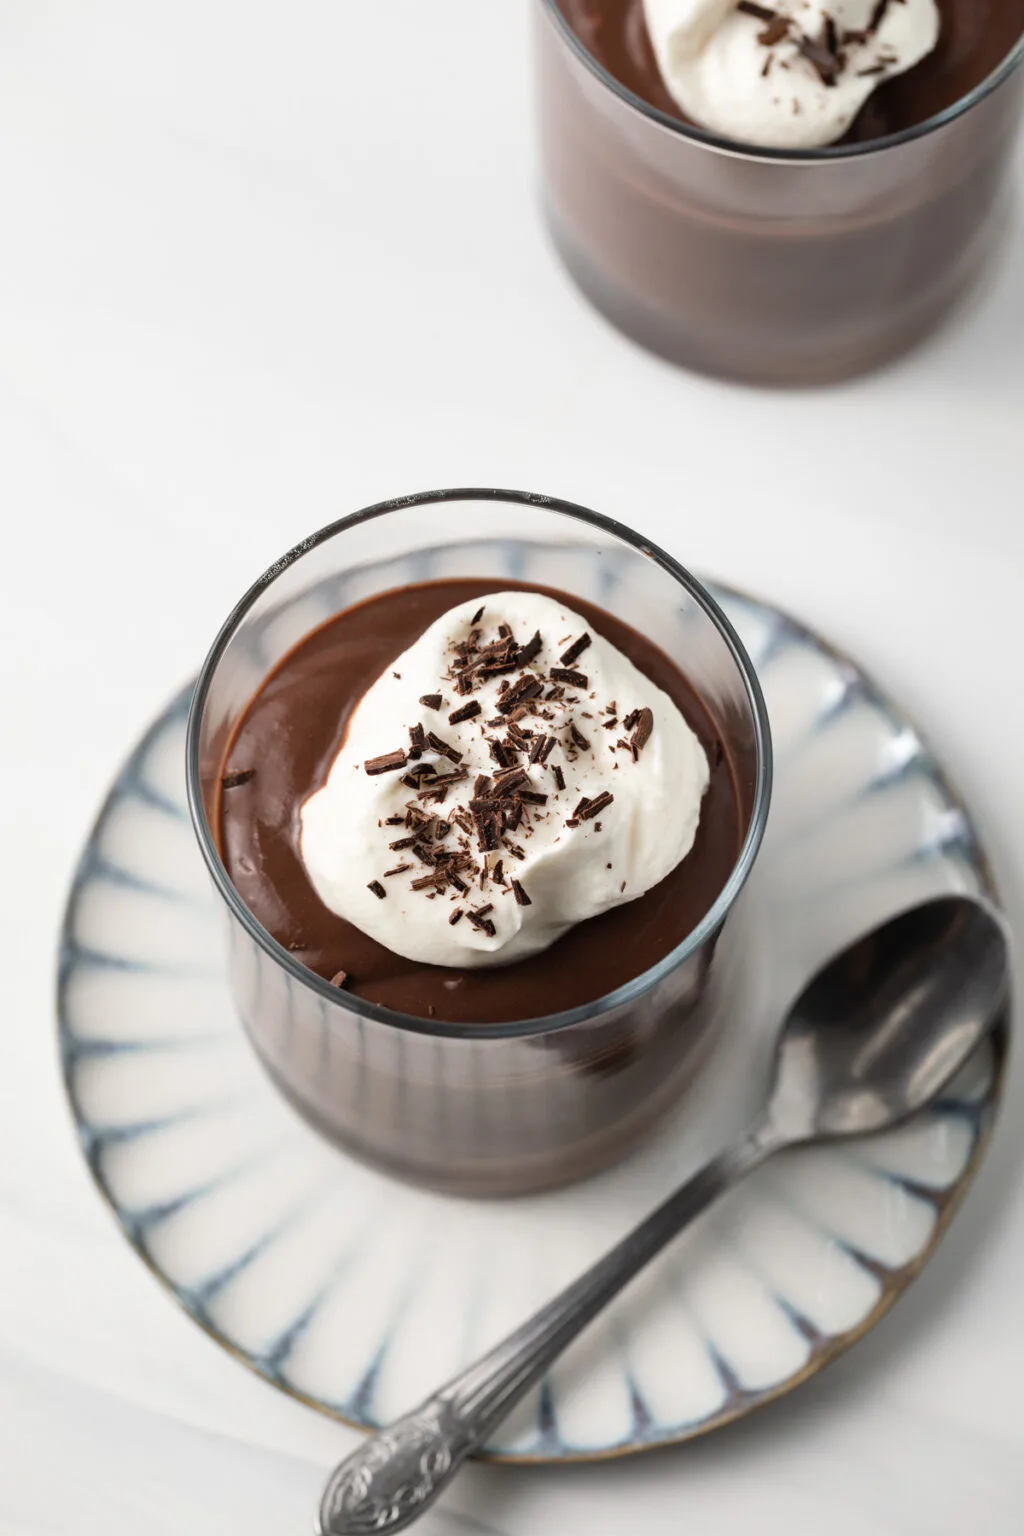 cups of chocolate pudding; Part of a round-up collection of recipes compiled by Jane Bonacci, The Heritage Cook, 15 Chocolate Desserts for your Holiday Table. 